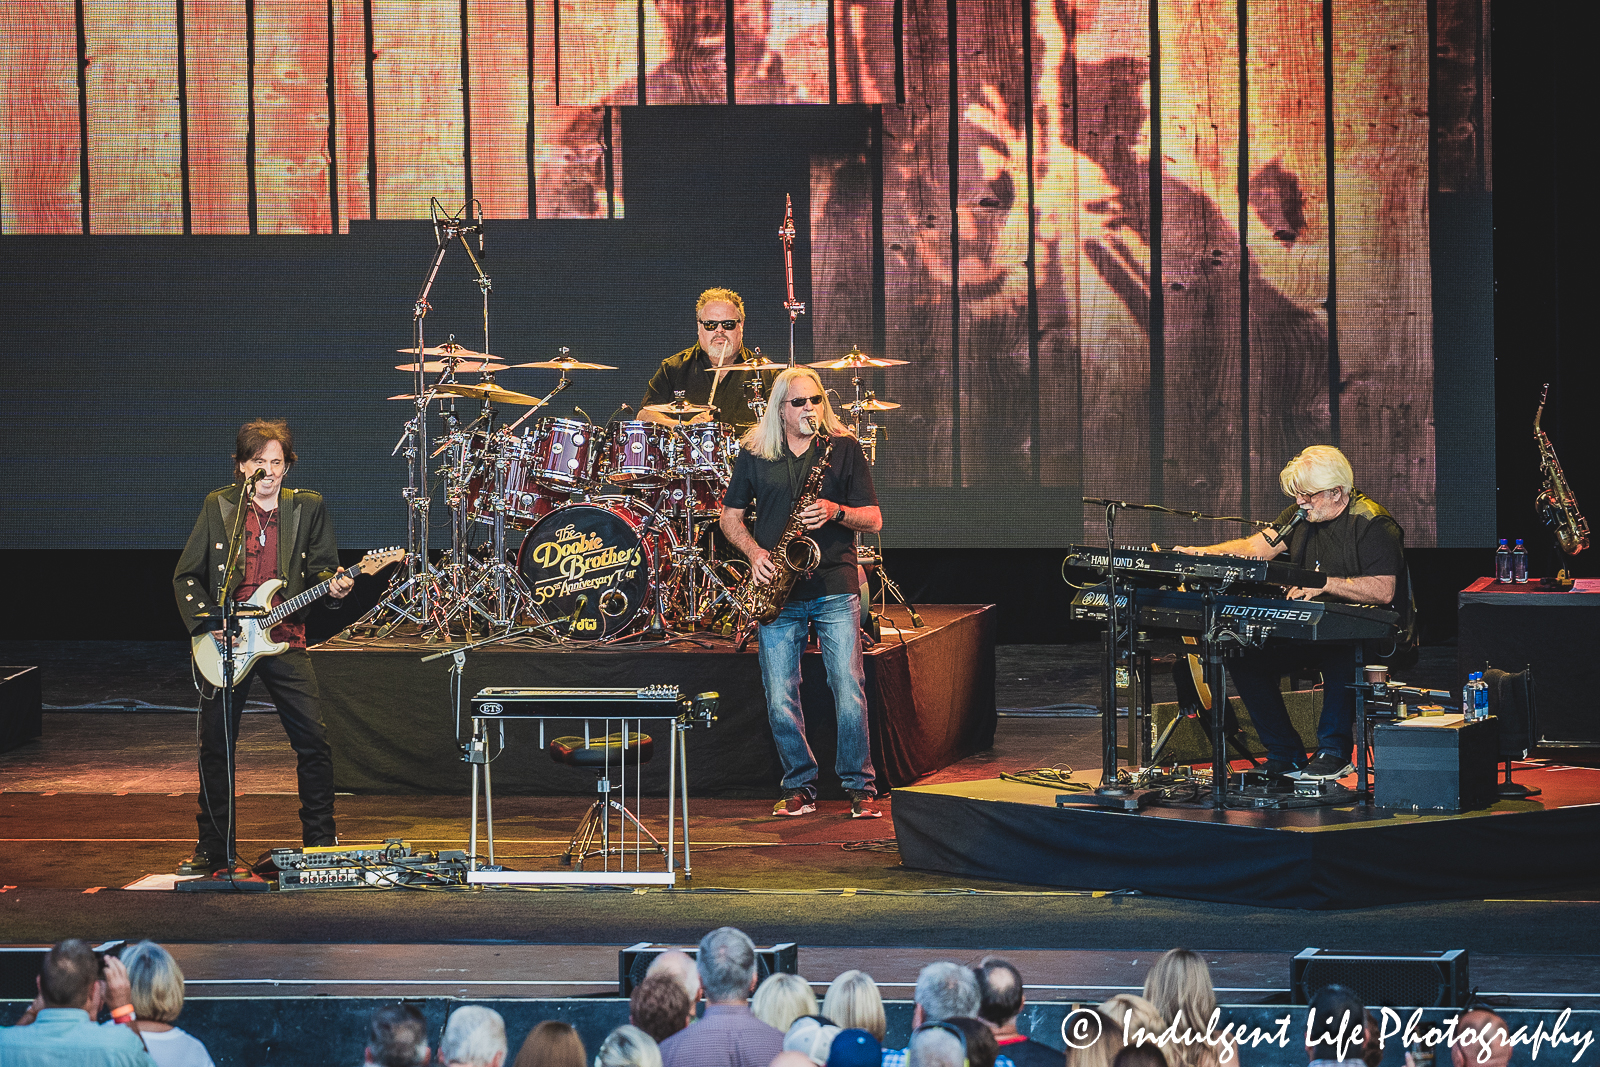 Doobie Brothers founding member John McFee and classic member Michael McDonald along with tour members Marc Russo on saxophone and Ed Toth on drums at Starlight Theatre in Kansas City, MO on June 14, 2023.